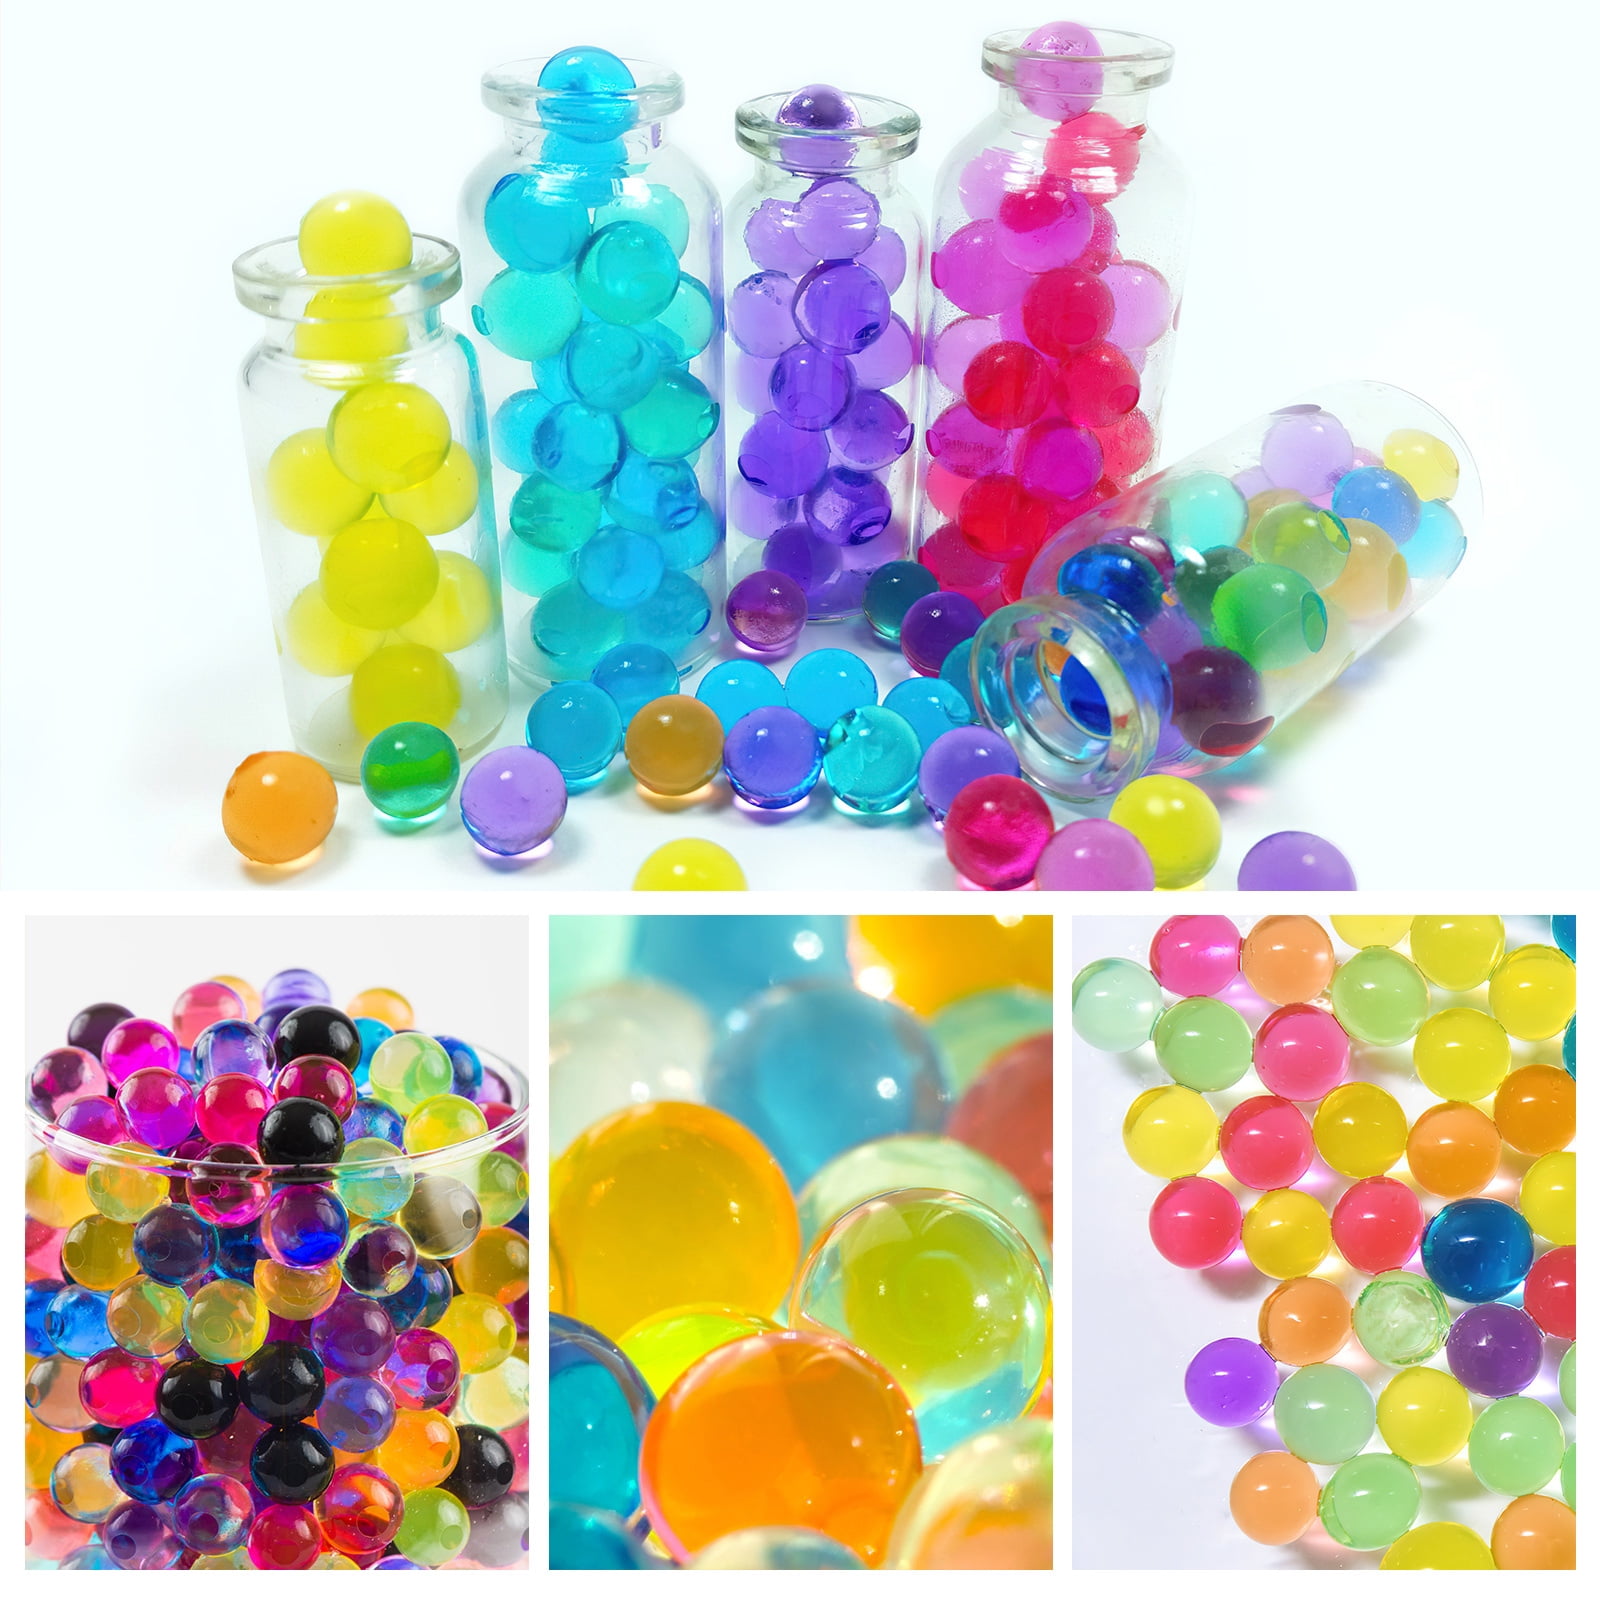  YIQUDUO 100,000 Clear Water Beads for Vases, Transparent Water  Gel Beads Vase Filler for Floating Pearls, Floating Candle Making, Wedding  Decoration Floral Arrangement : Home & Kitchen